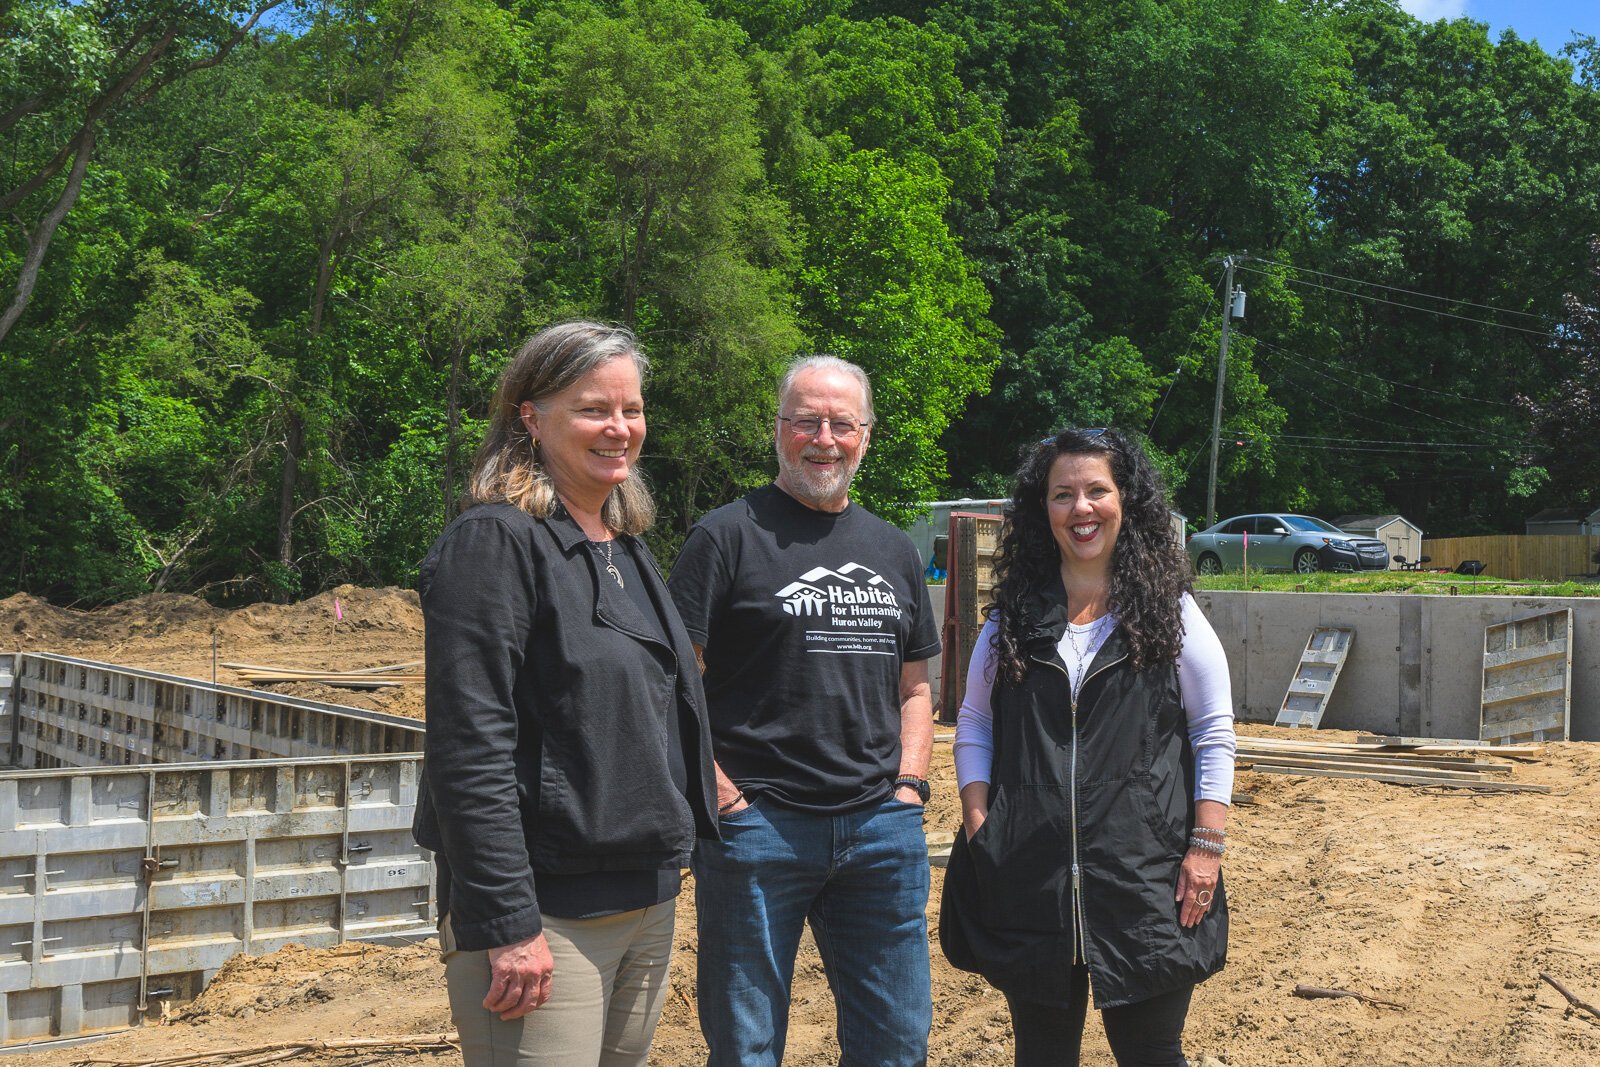 Jeanette Jackson, Michael Muha, and Sarah Stanton at Habitat for Humanity of Huron Valley's home construction site on Firwood Street in Ypsilanti.